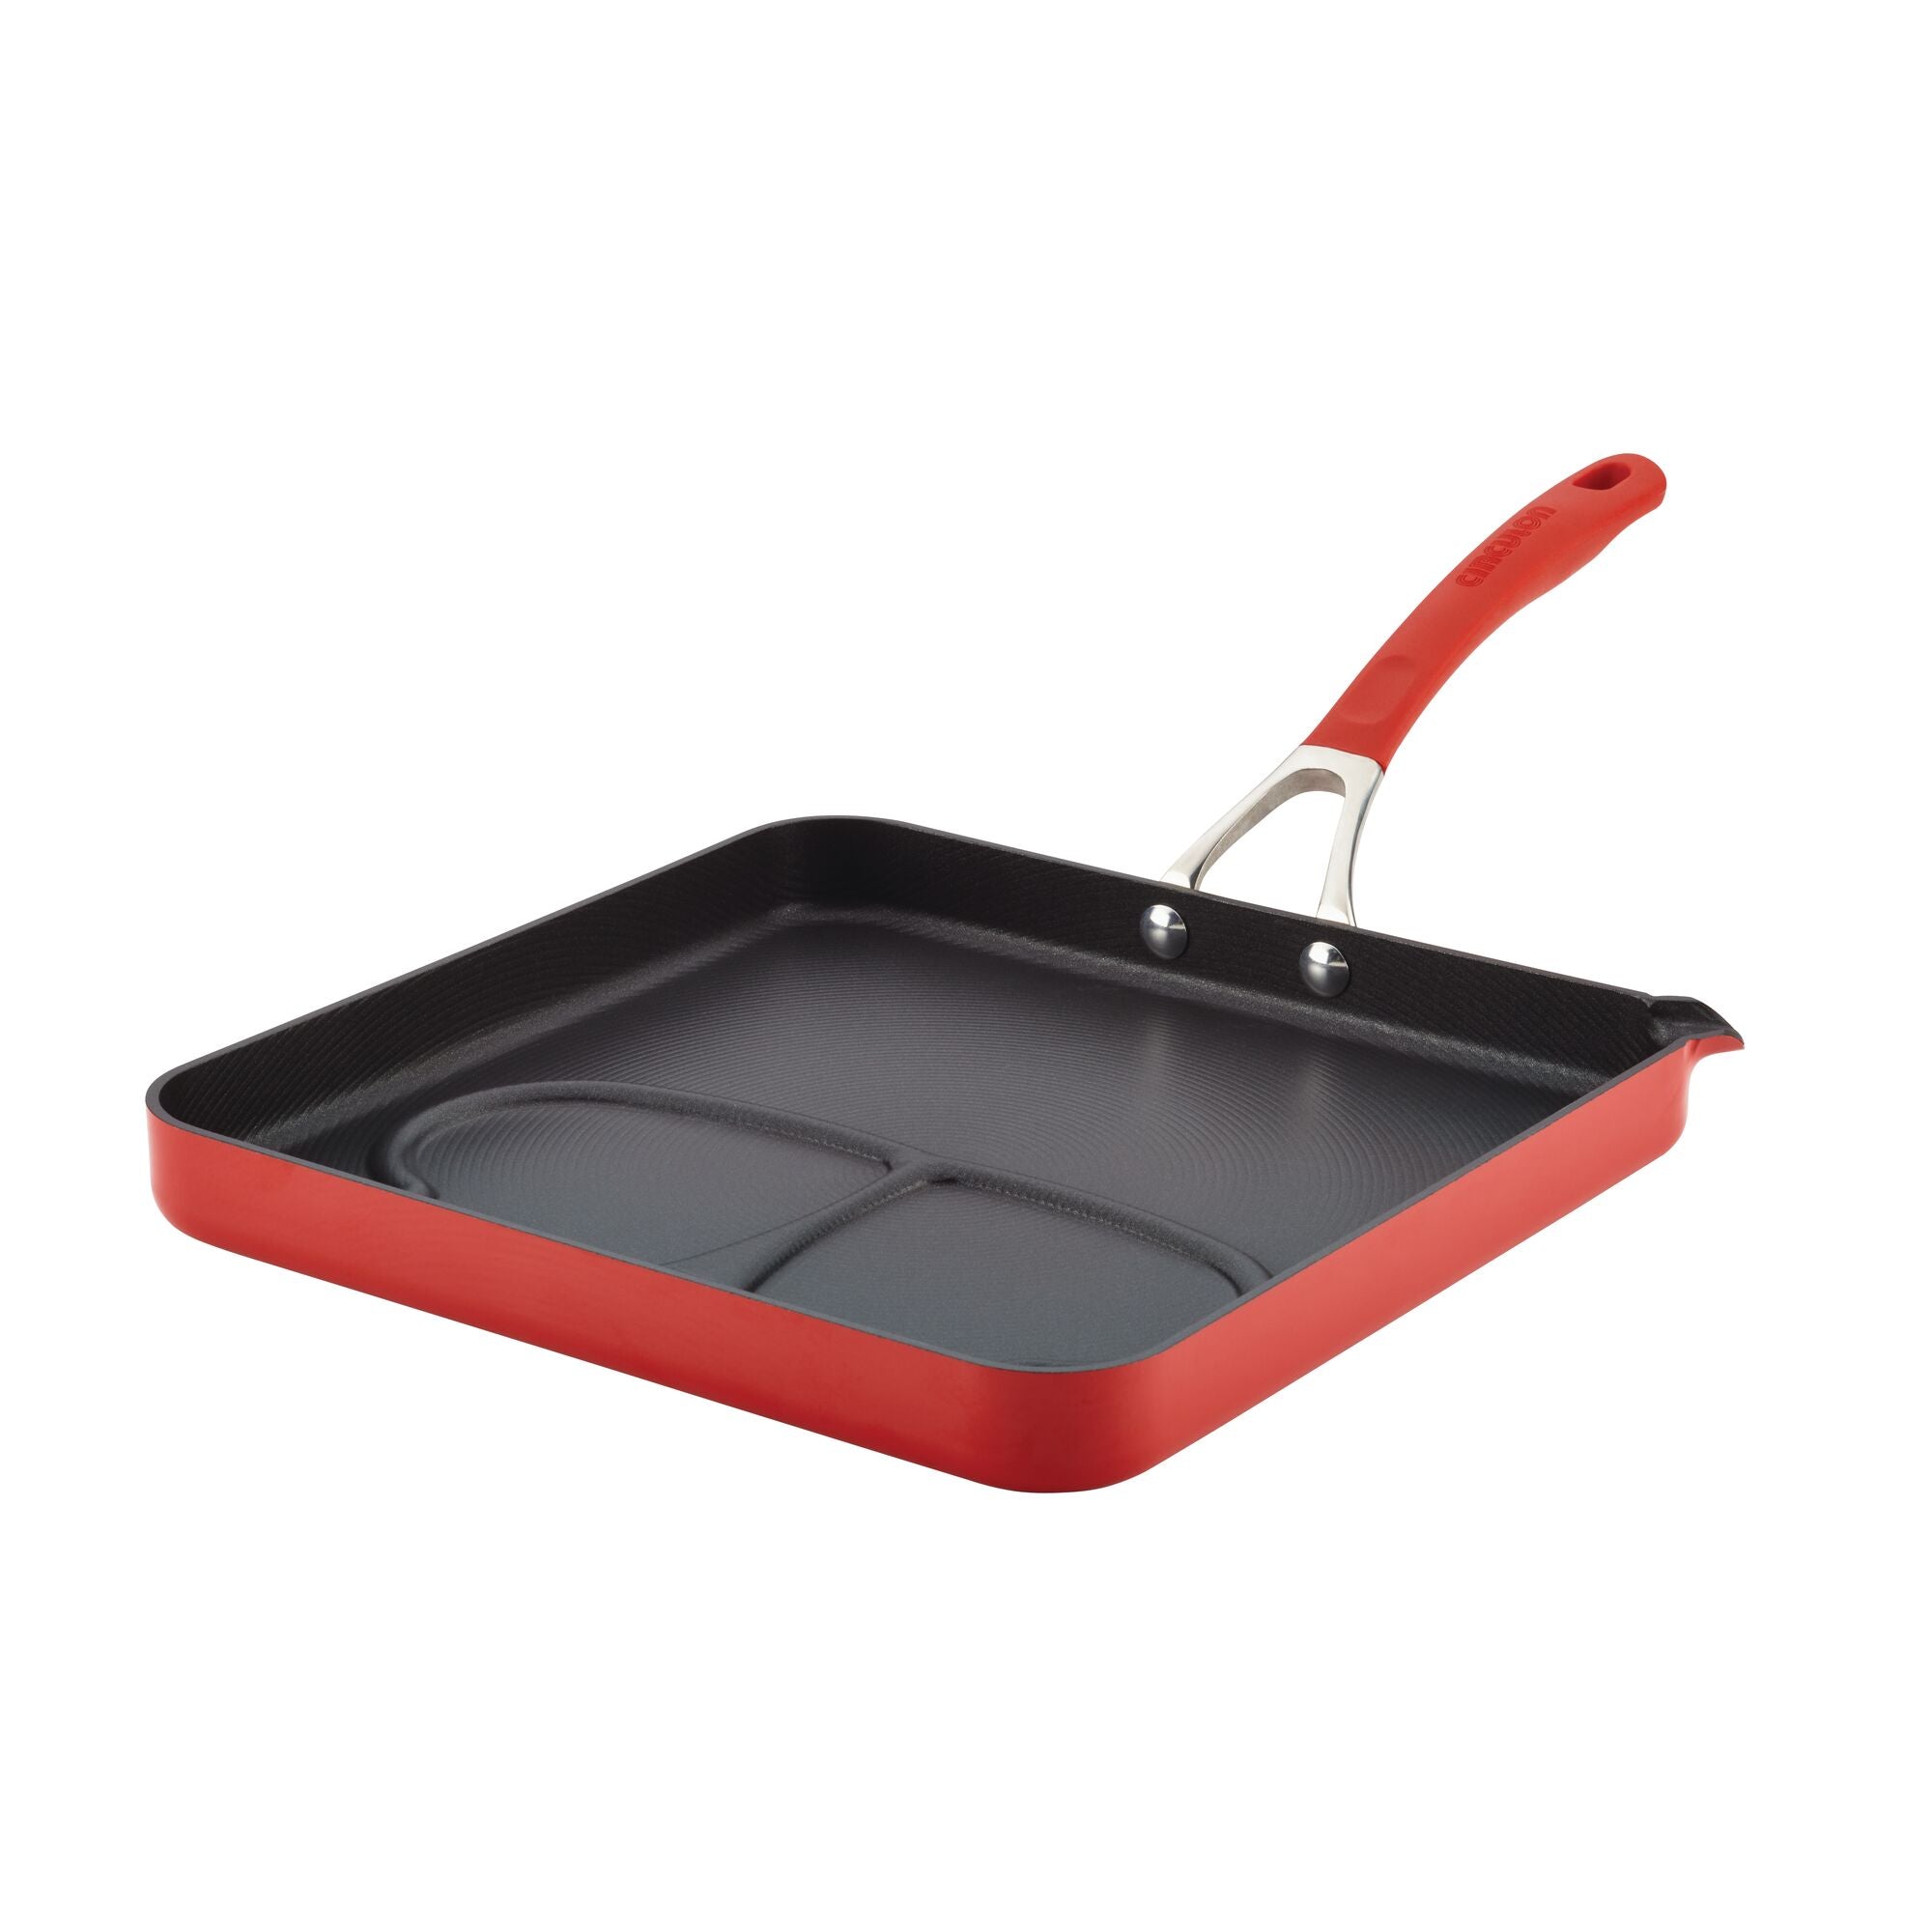 Circulon: Gear up Dad's Grill with the NEW Circulon Cutting Board